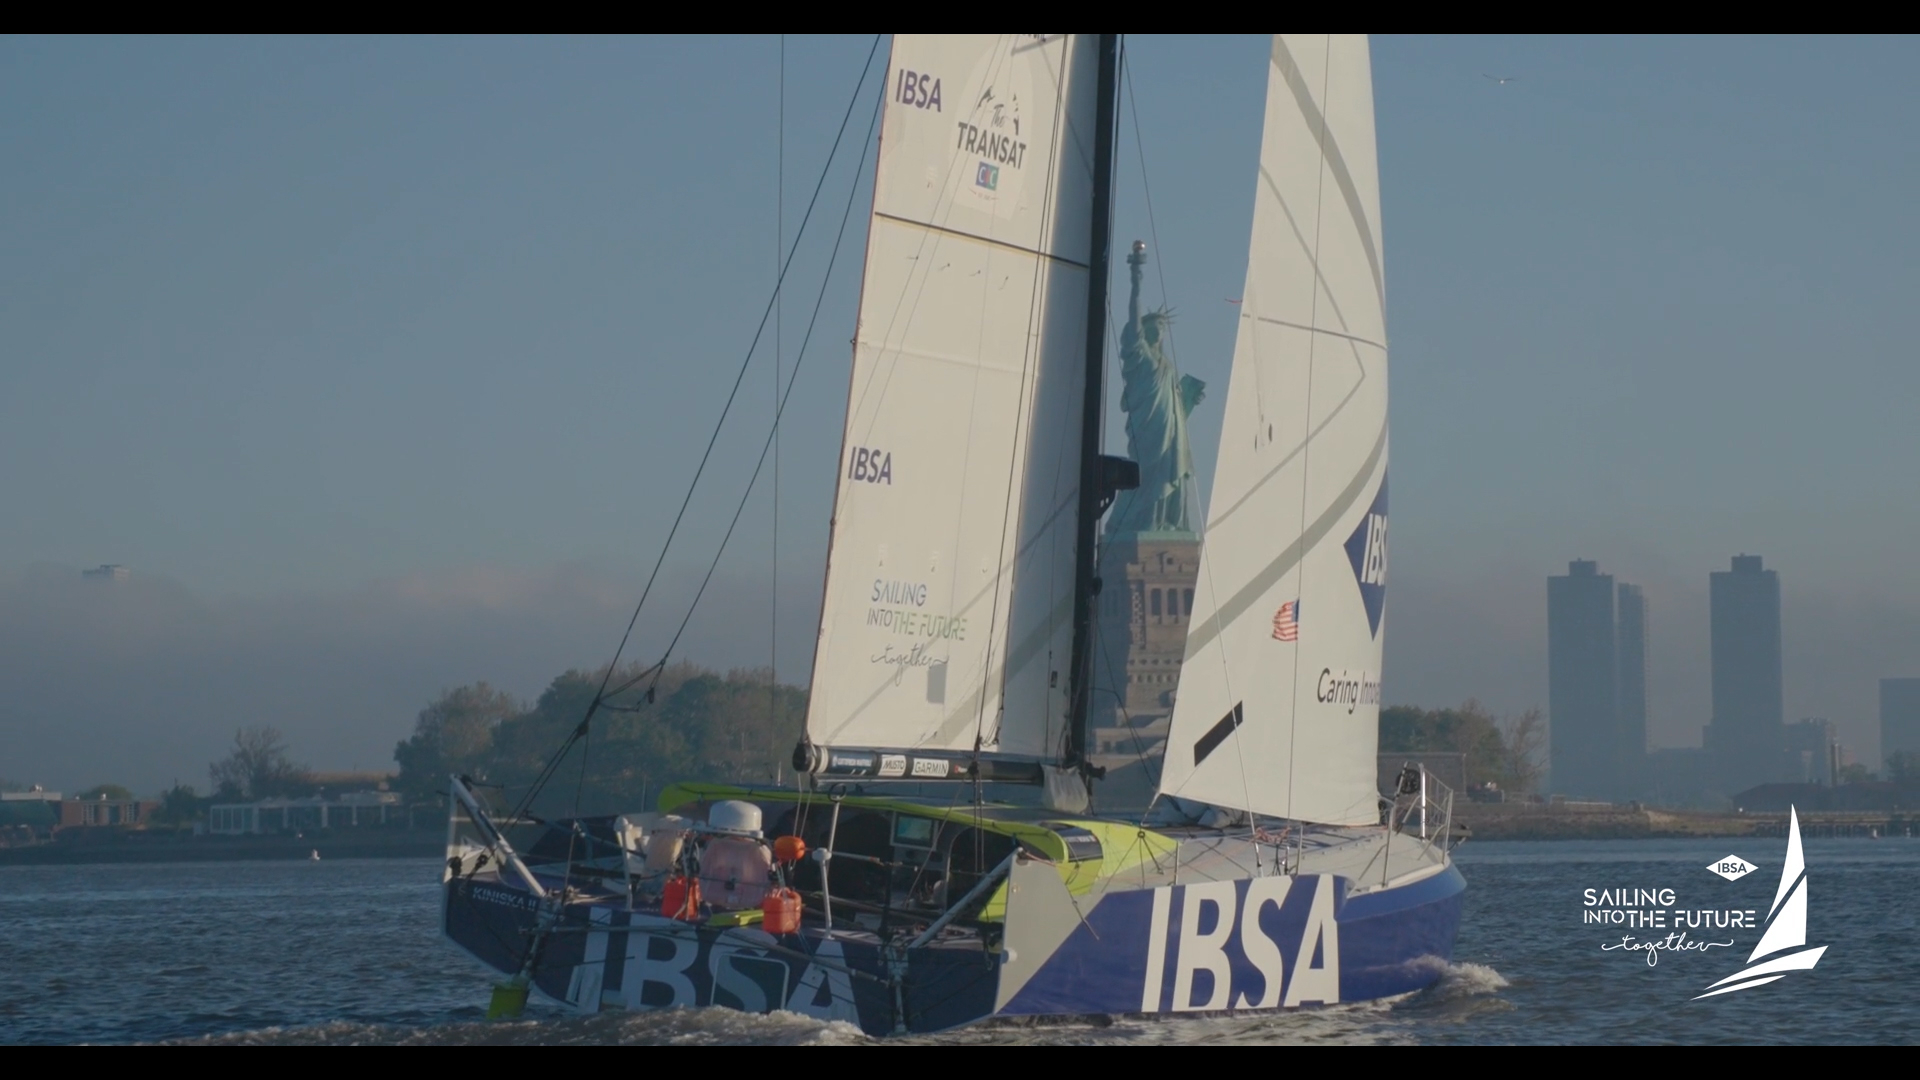 Alberto Bona on the Class40 IBSA arrives in New York - 5th place at the Transat CIC